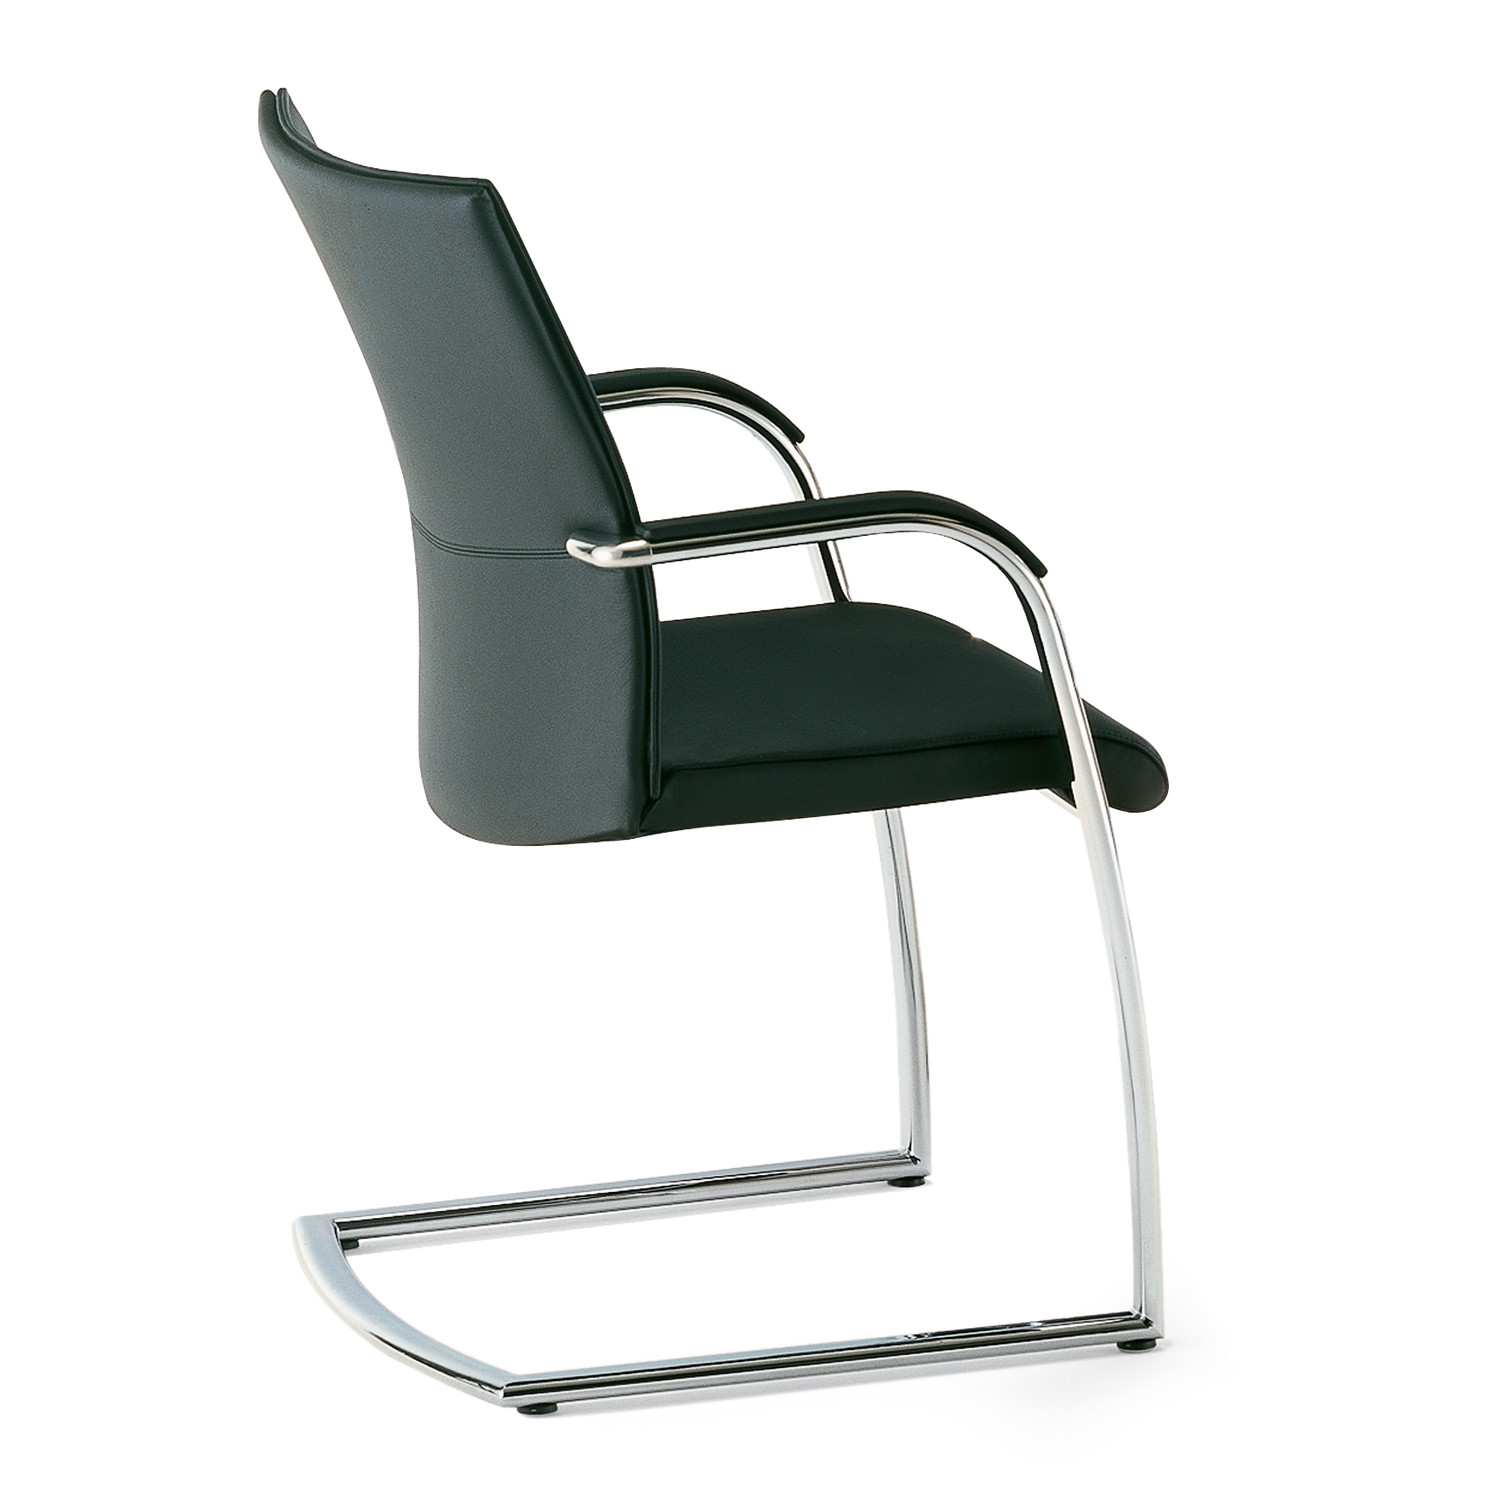 Orbit Visitors Chair from Klober